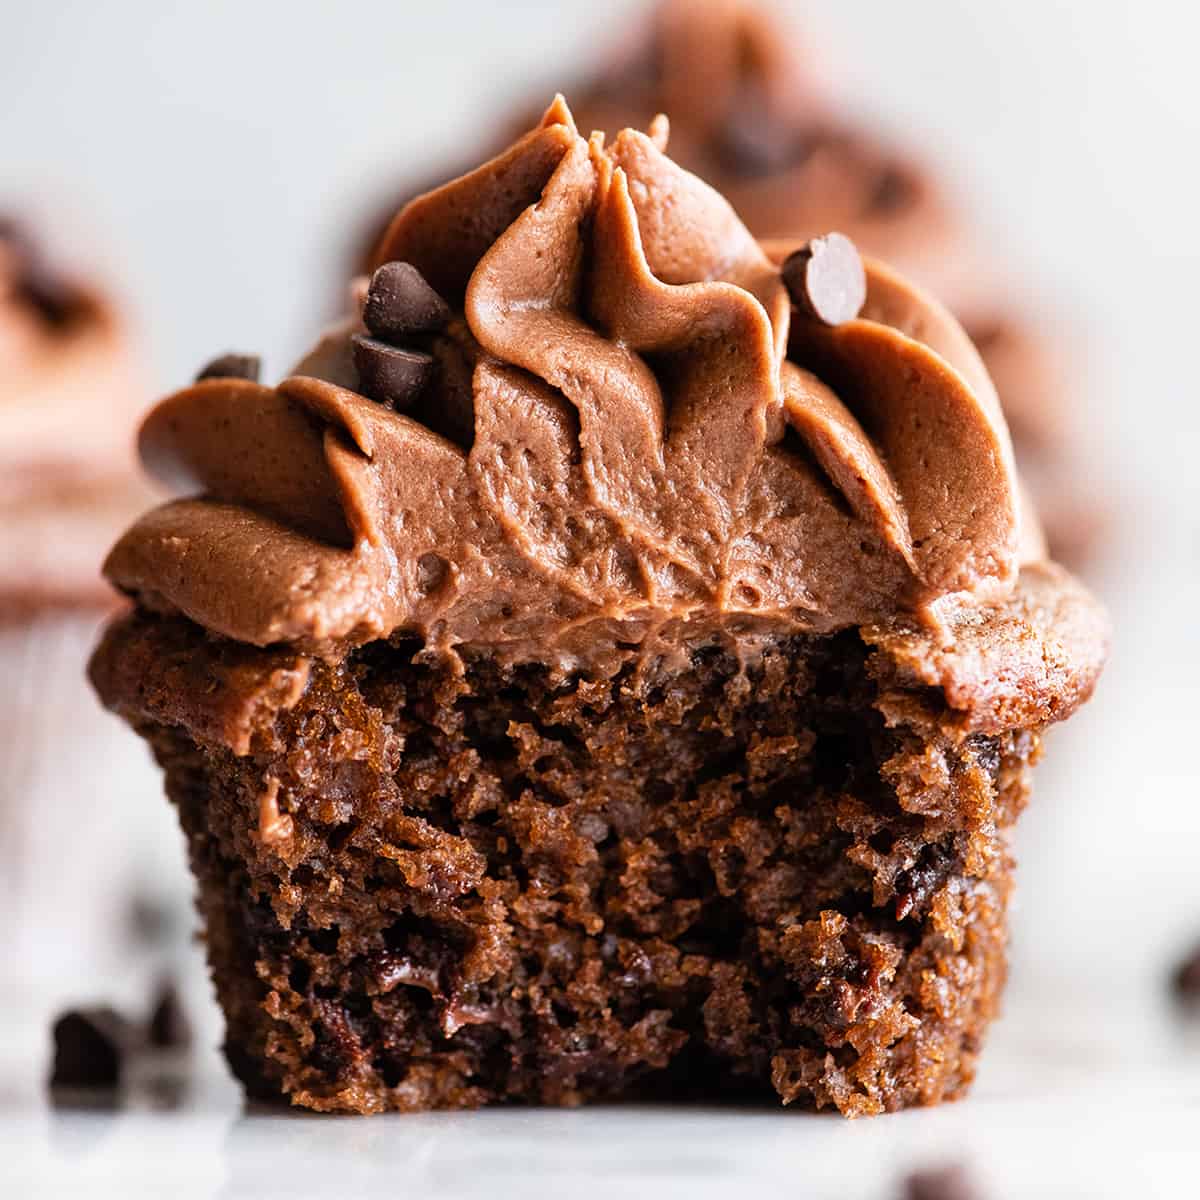 up close front view of a chocolate cupcake cut in half with chocolate frosting